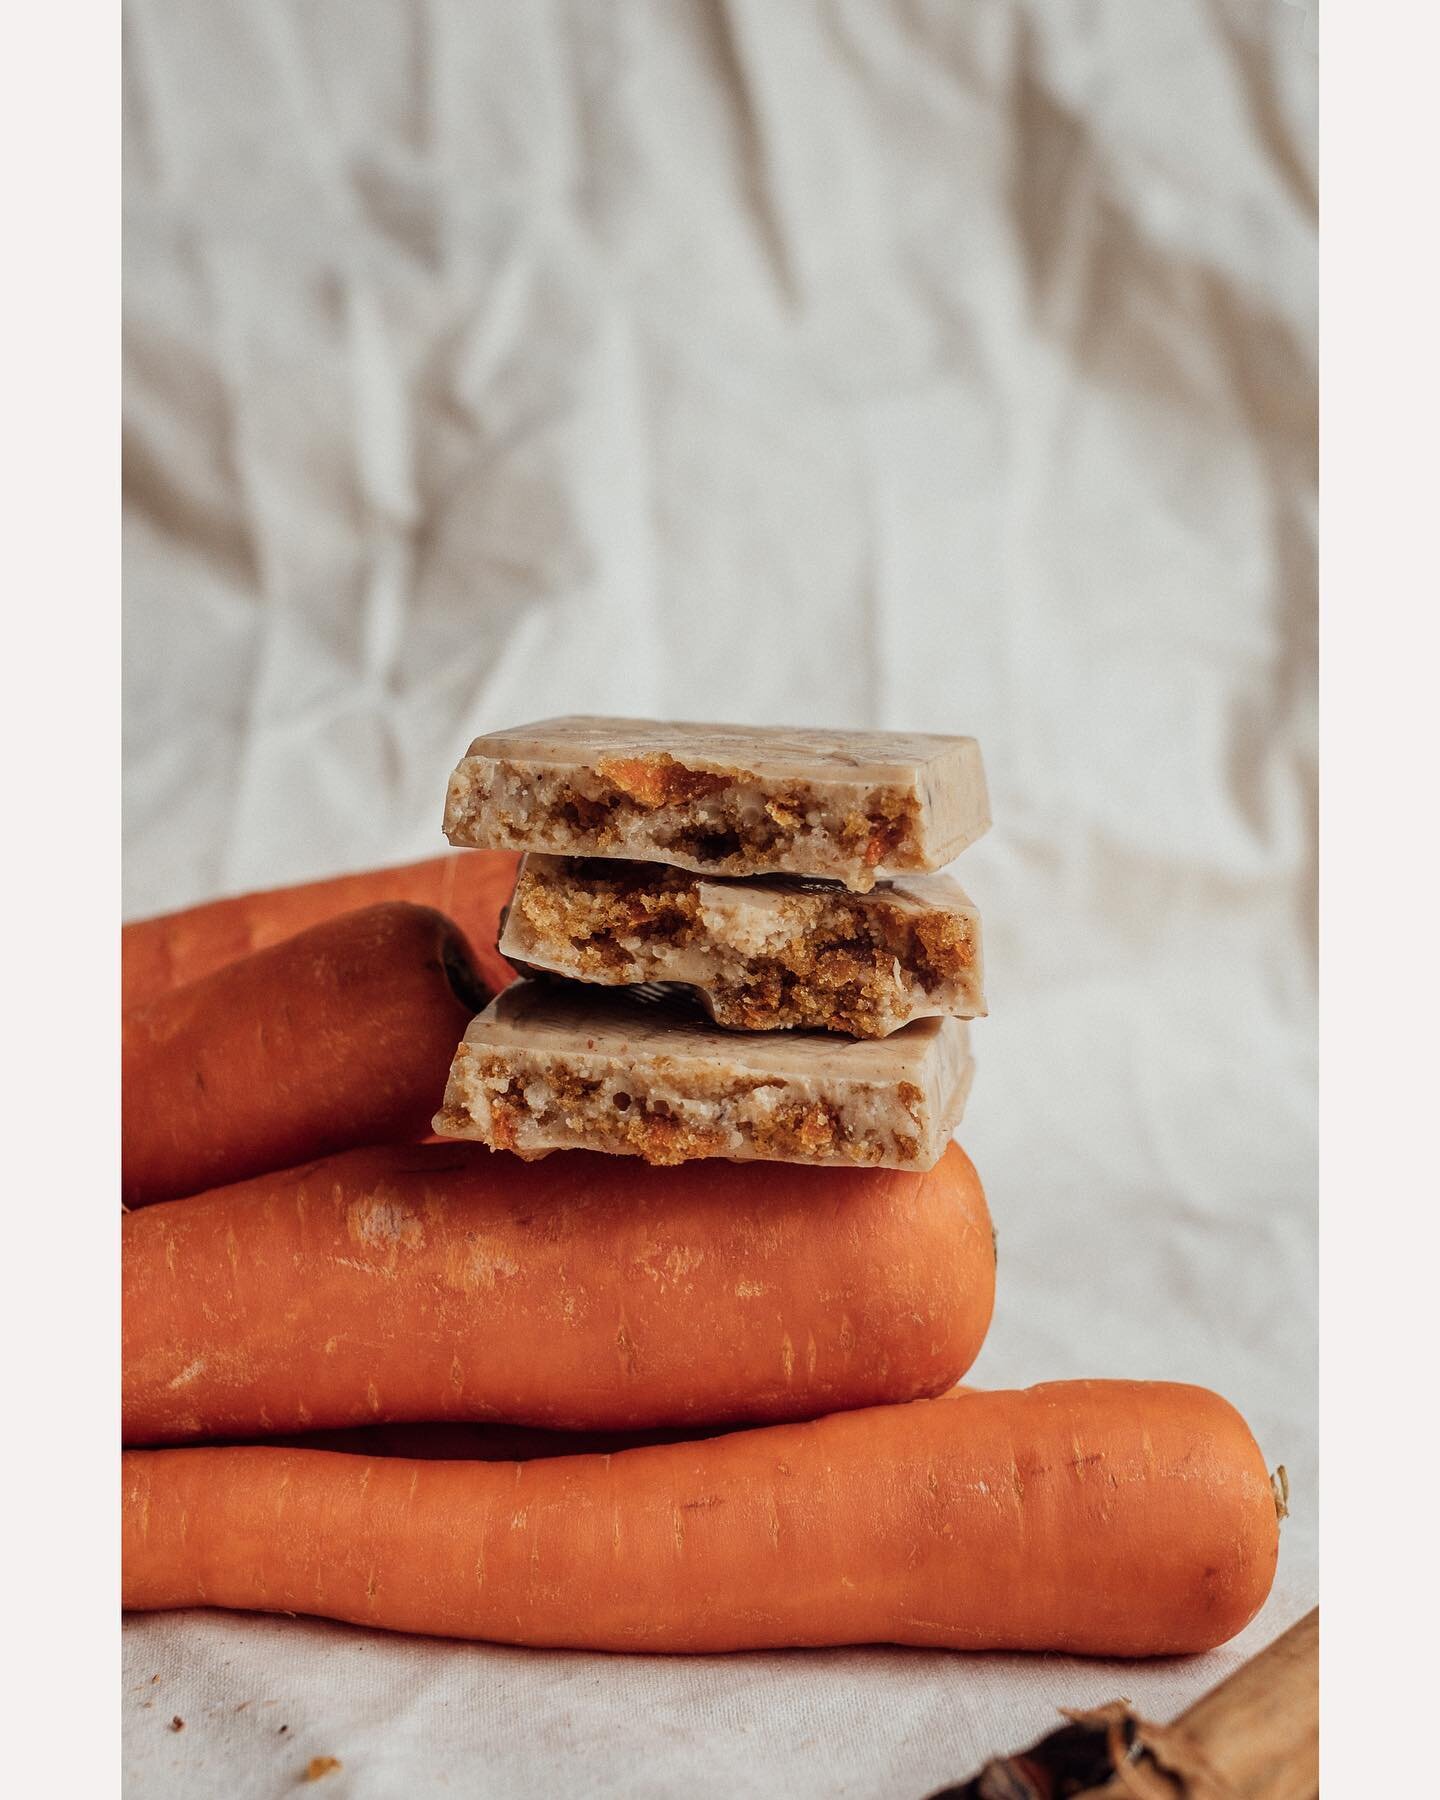 when you&rsquo;re craving cake and chocolate but don&rsquo;t want to compromise, say hello to our carrot cake white chocolate block 👋🏼😍
#porquenolosdos #planetcocoa